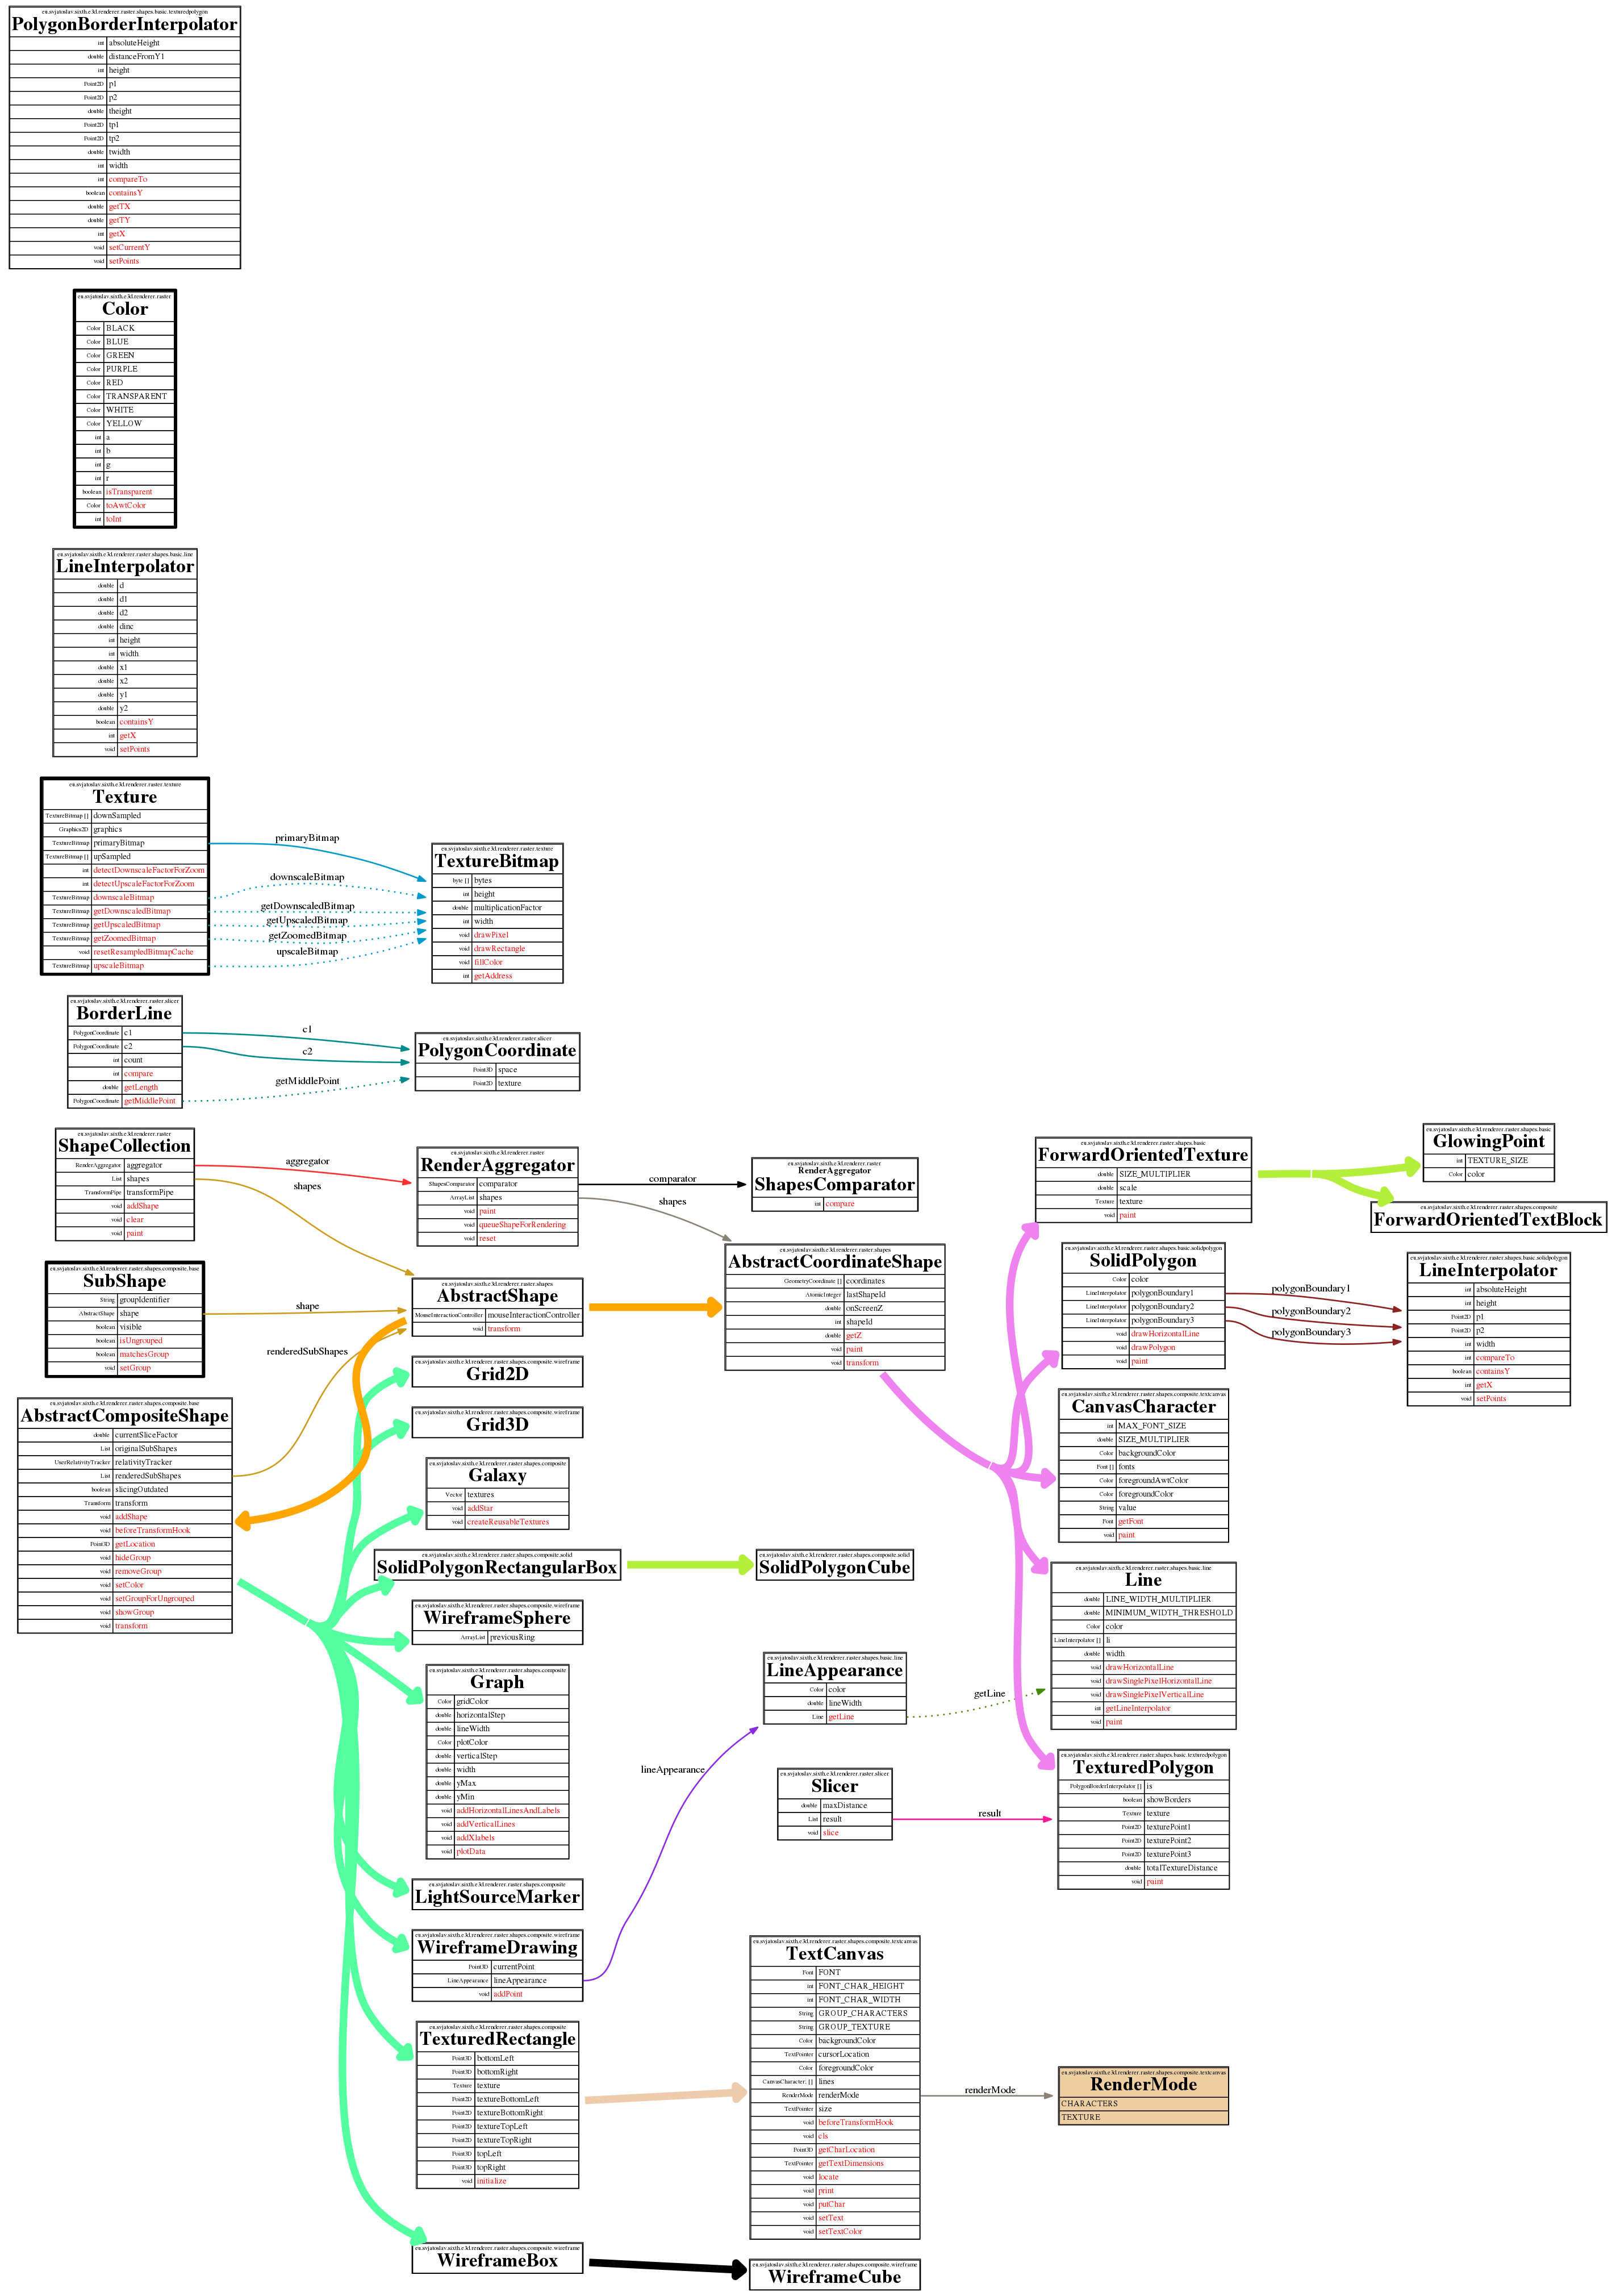 doc/code graph/raster engine.png